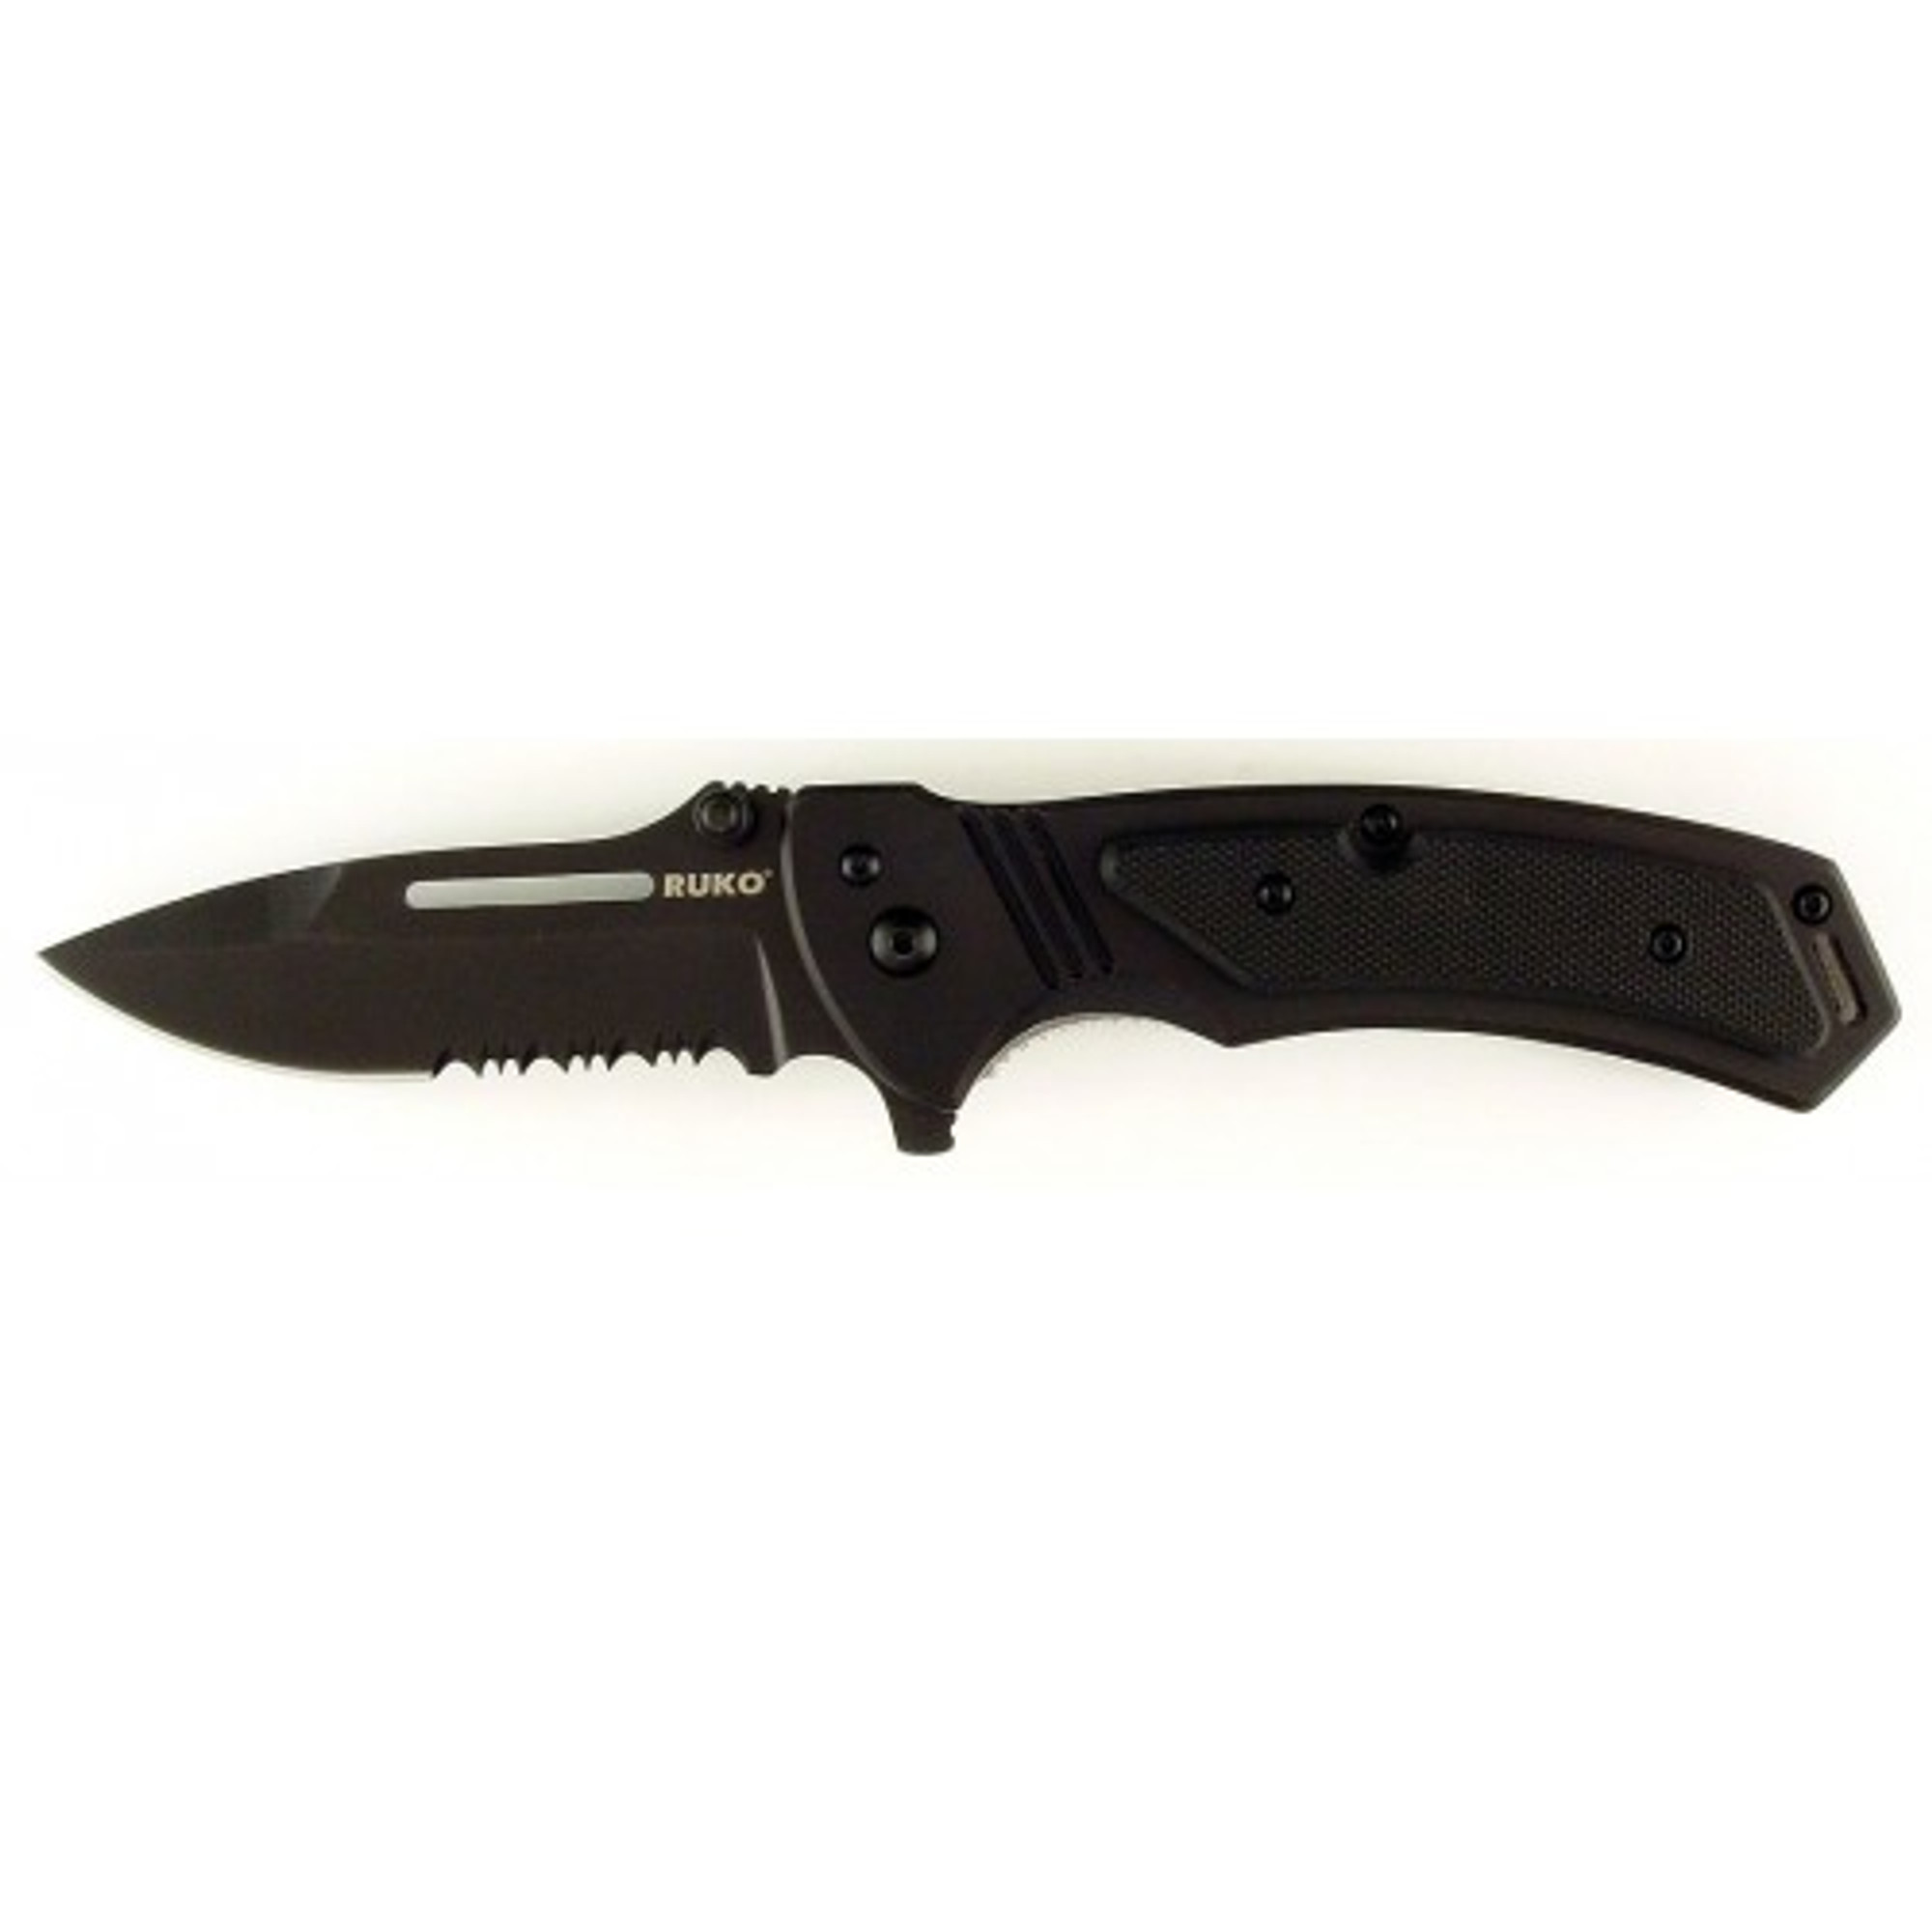 RUKO RUK0121, 440A, 3-1/4" Folding Blade Tactical Knife, G10/Stainless Steel Handle